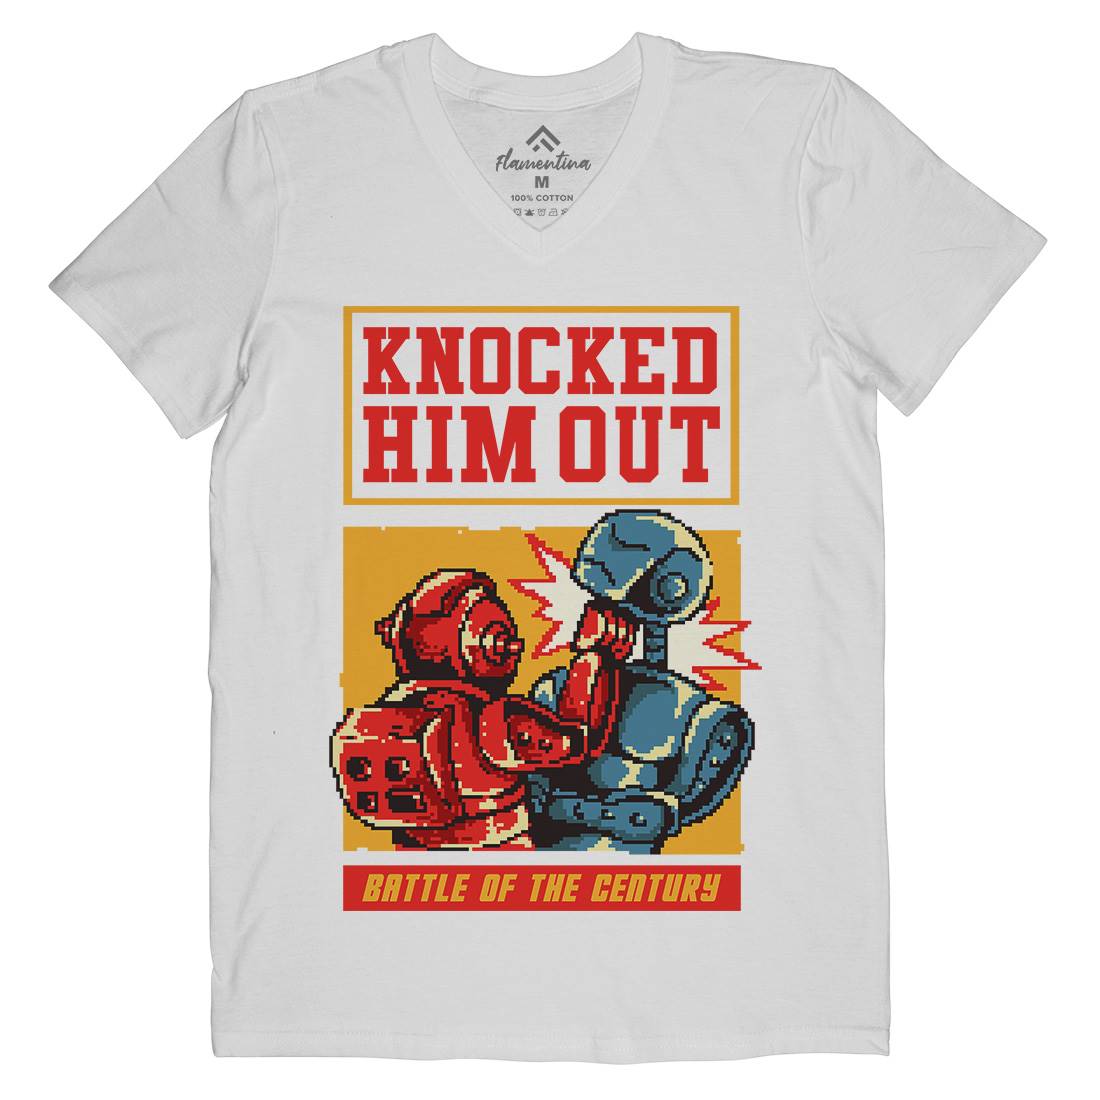 Knocked Him Out Mens V-Neck T-Shirt Space B923